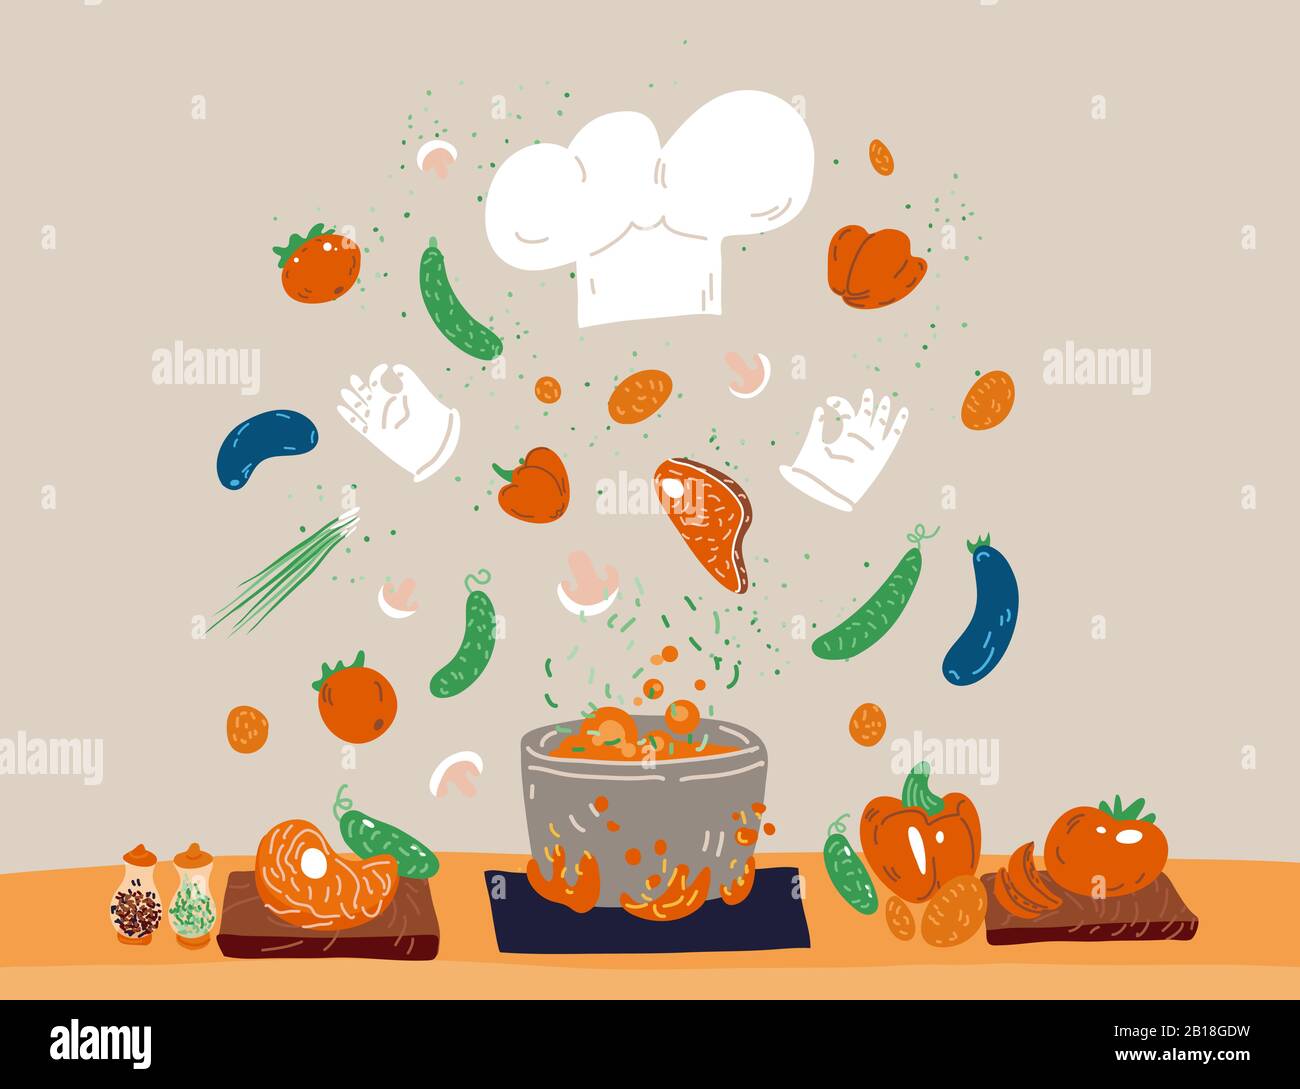 https://c8.alamy.com/comp/2B18GDW/vector-cartoon-cute-concept-of-professional-cooking-for-small-restaurants-and-home-cook-white-hat-and-gloves-with-vegetables-meat-ingredients-for-2B18GDW.jpg